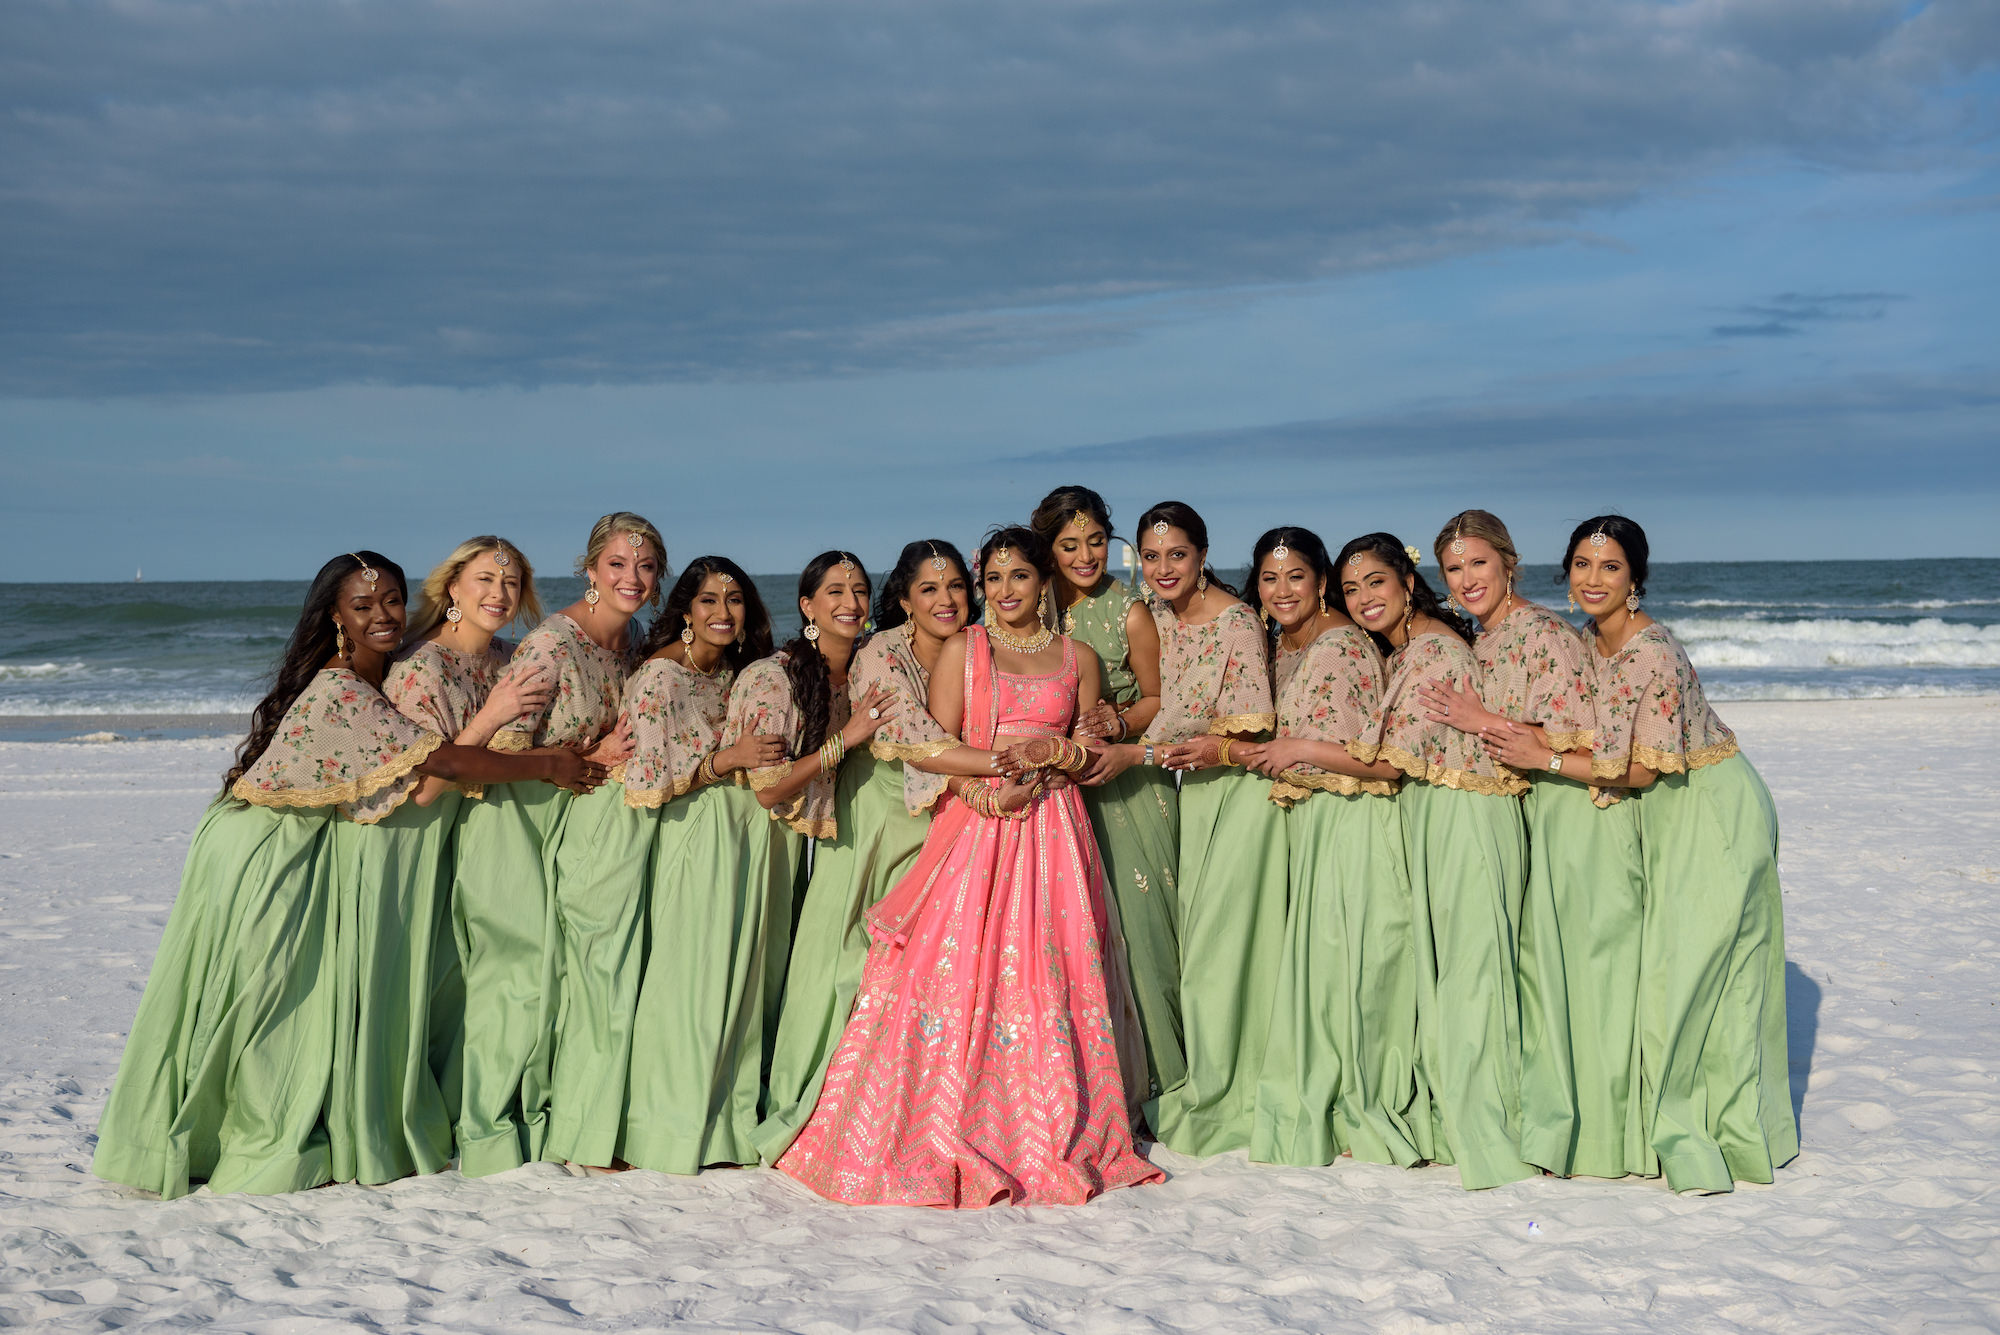 Bride and Bridesmaid on Clearwater Beach, Bride in Traditional Indian Wedding Dress a Pink Lehenga, Bridesmaids Wearing Green Sari Dress | Tampa Bay Wedding Hair and Makeup Artists Michele Renee the Studio